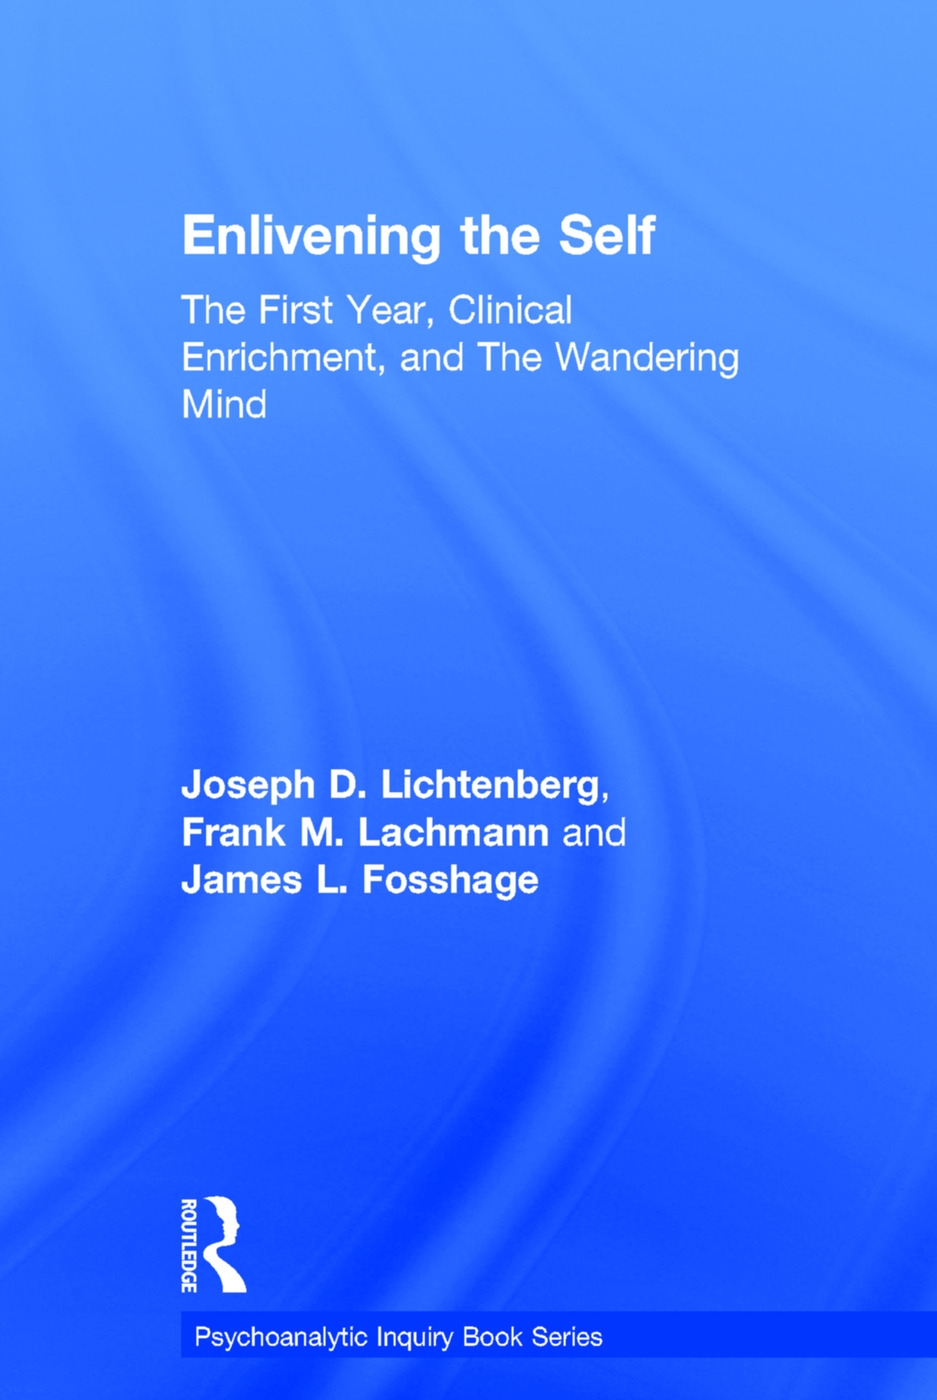 Enlivening the Self: The First Year, Clinical Enrichment, and the Wandering Mind